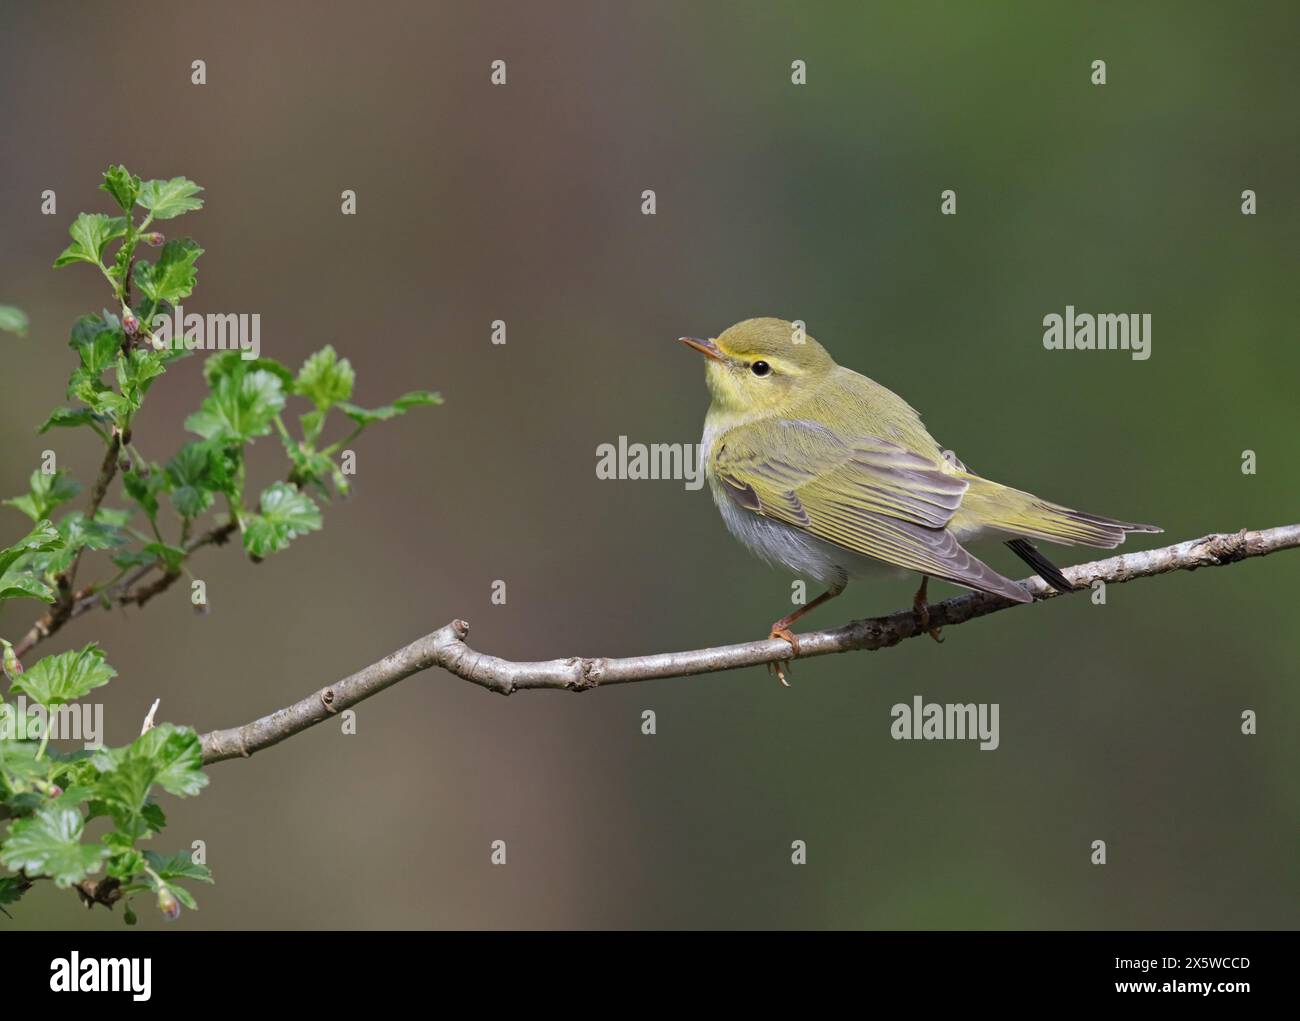 Wood warbler sitting on twig, green background Stock Photo